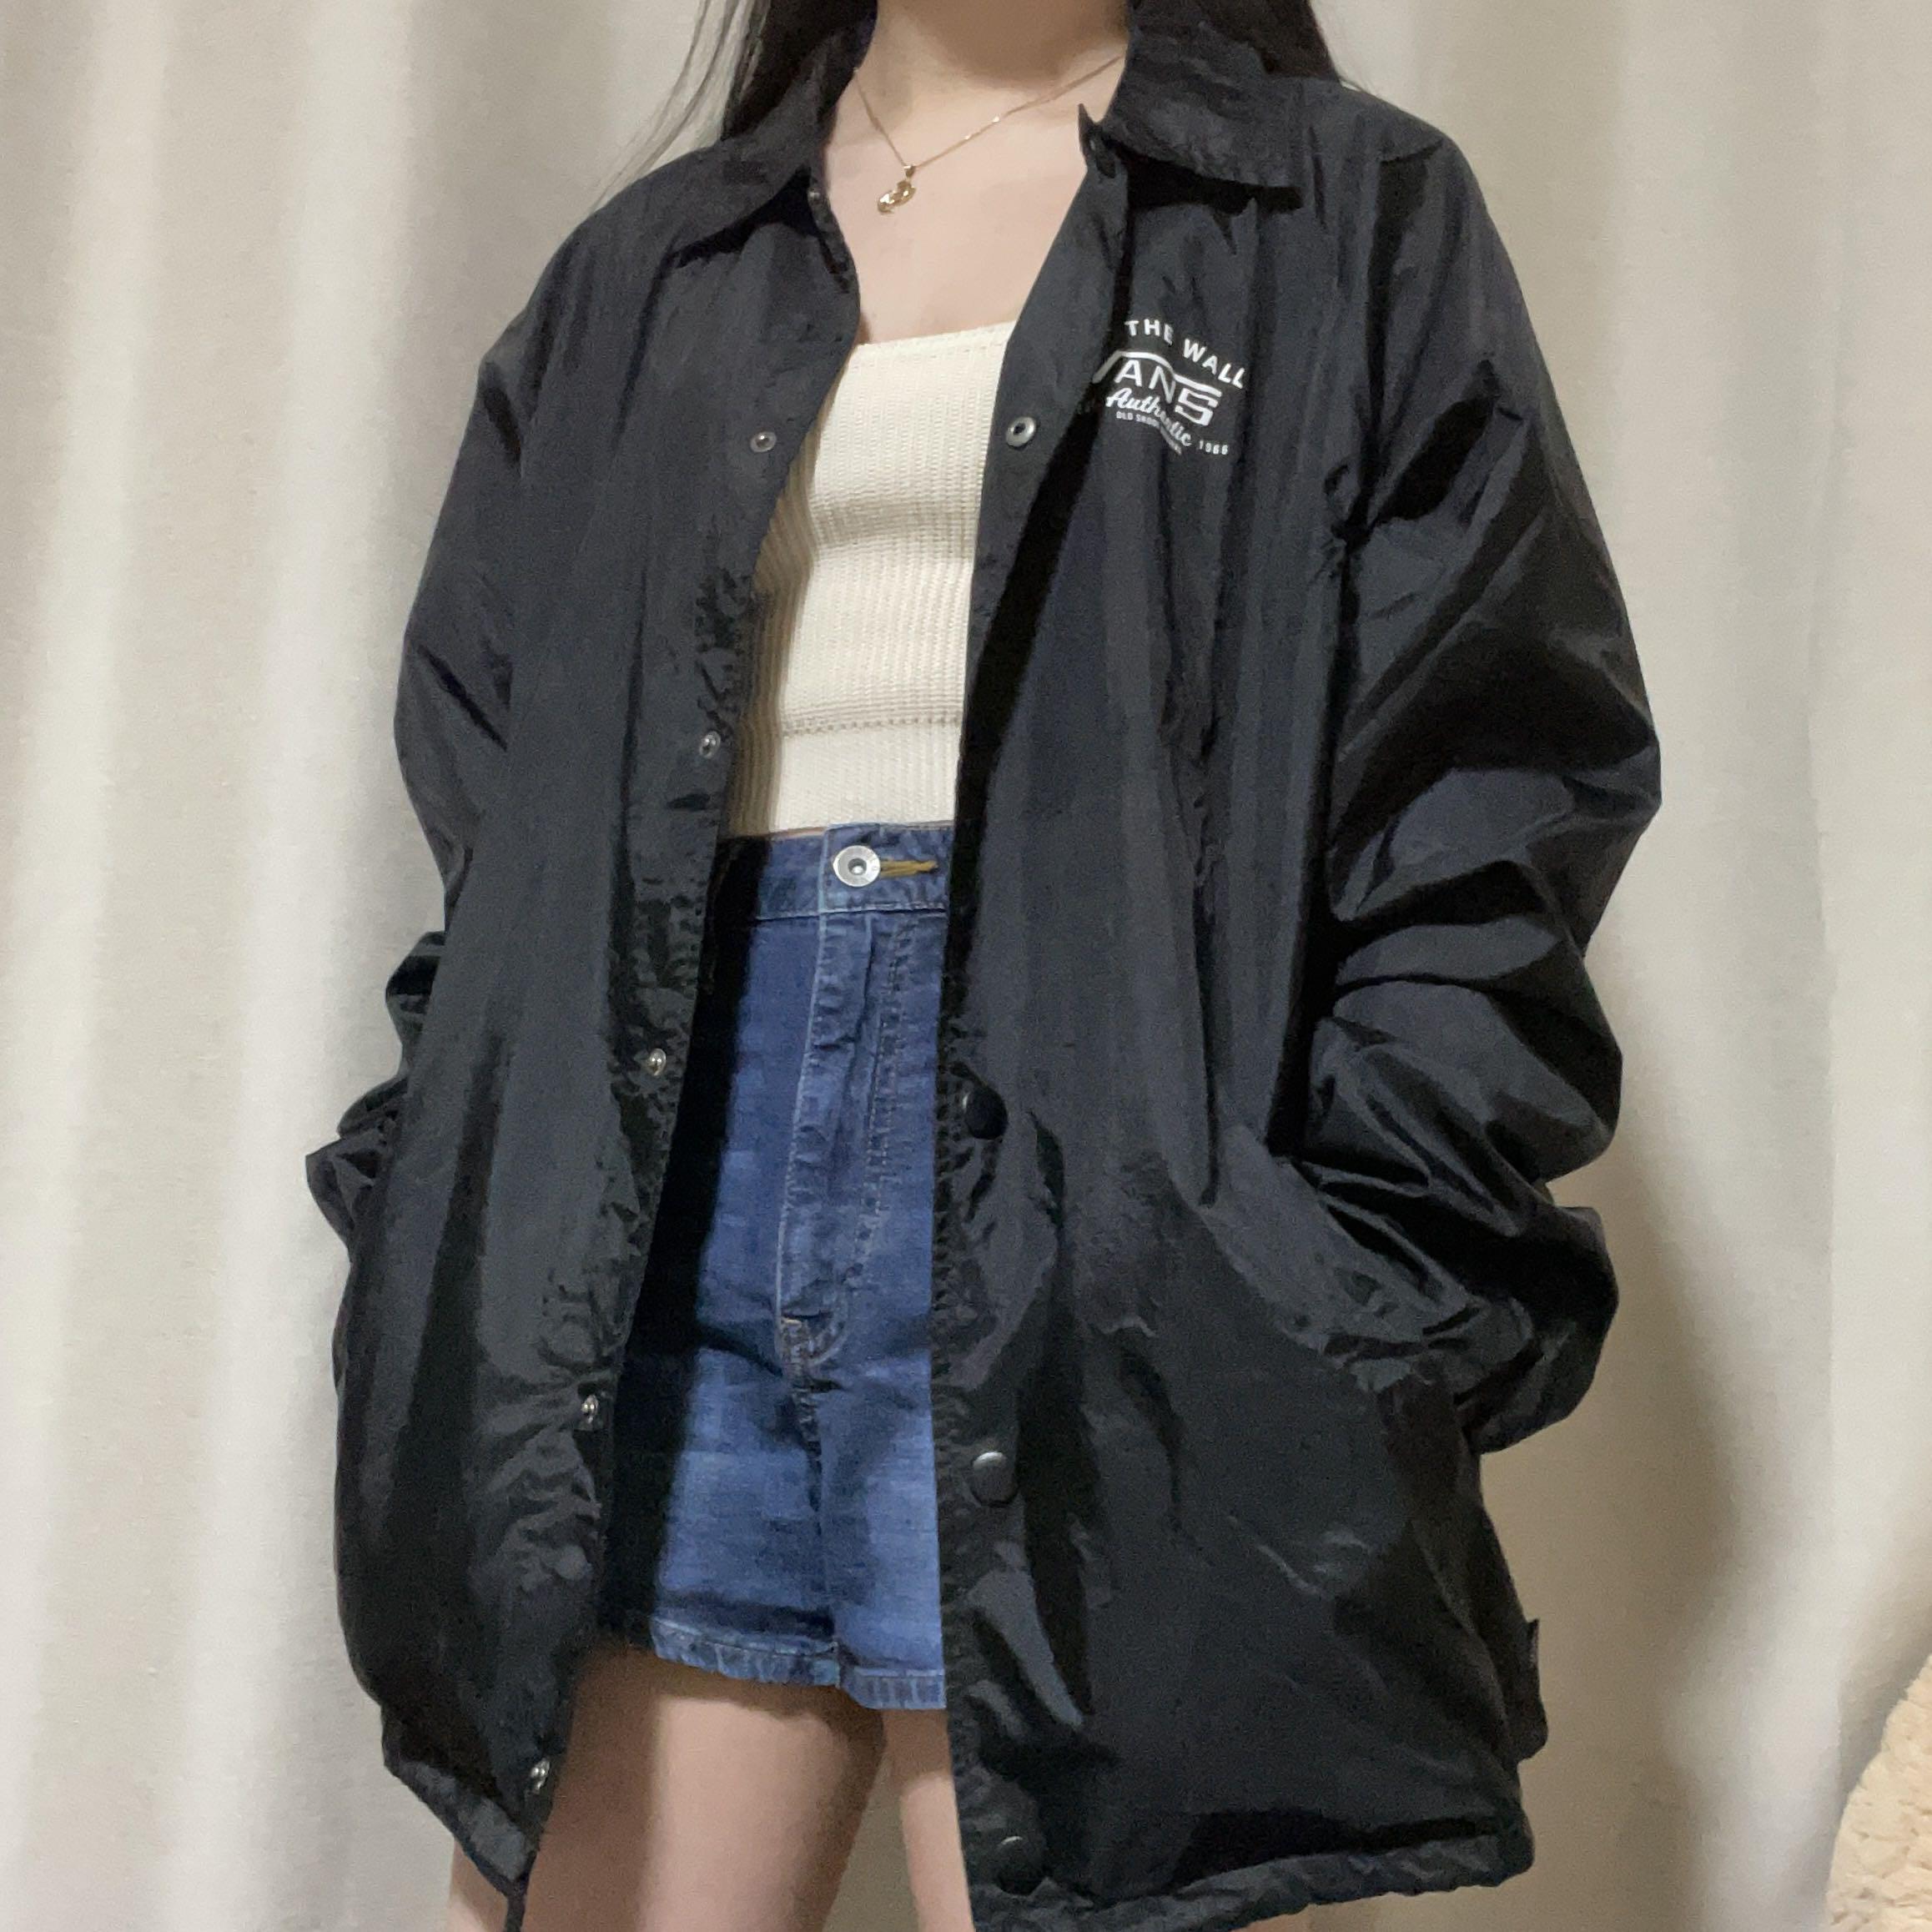 Vans Black Oversized Light Coach Jacket, Women's Fashion, Coats, Jackets  and Outerwear on Carousell